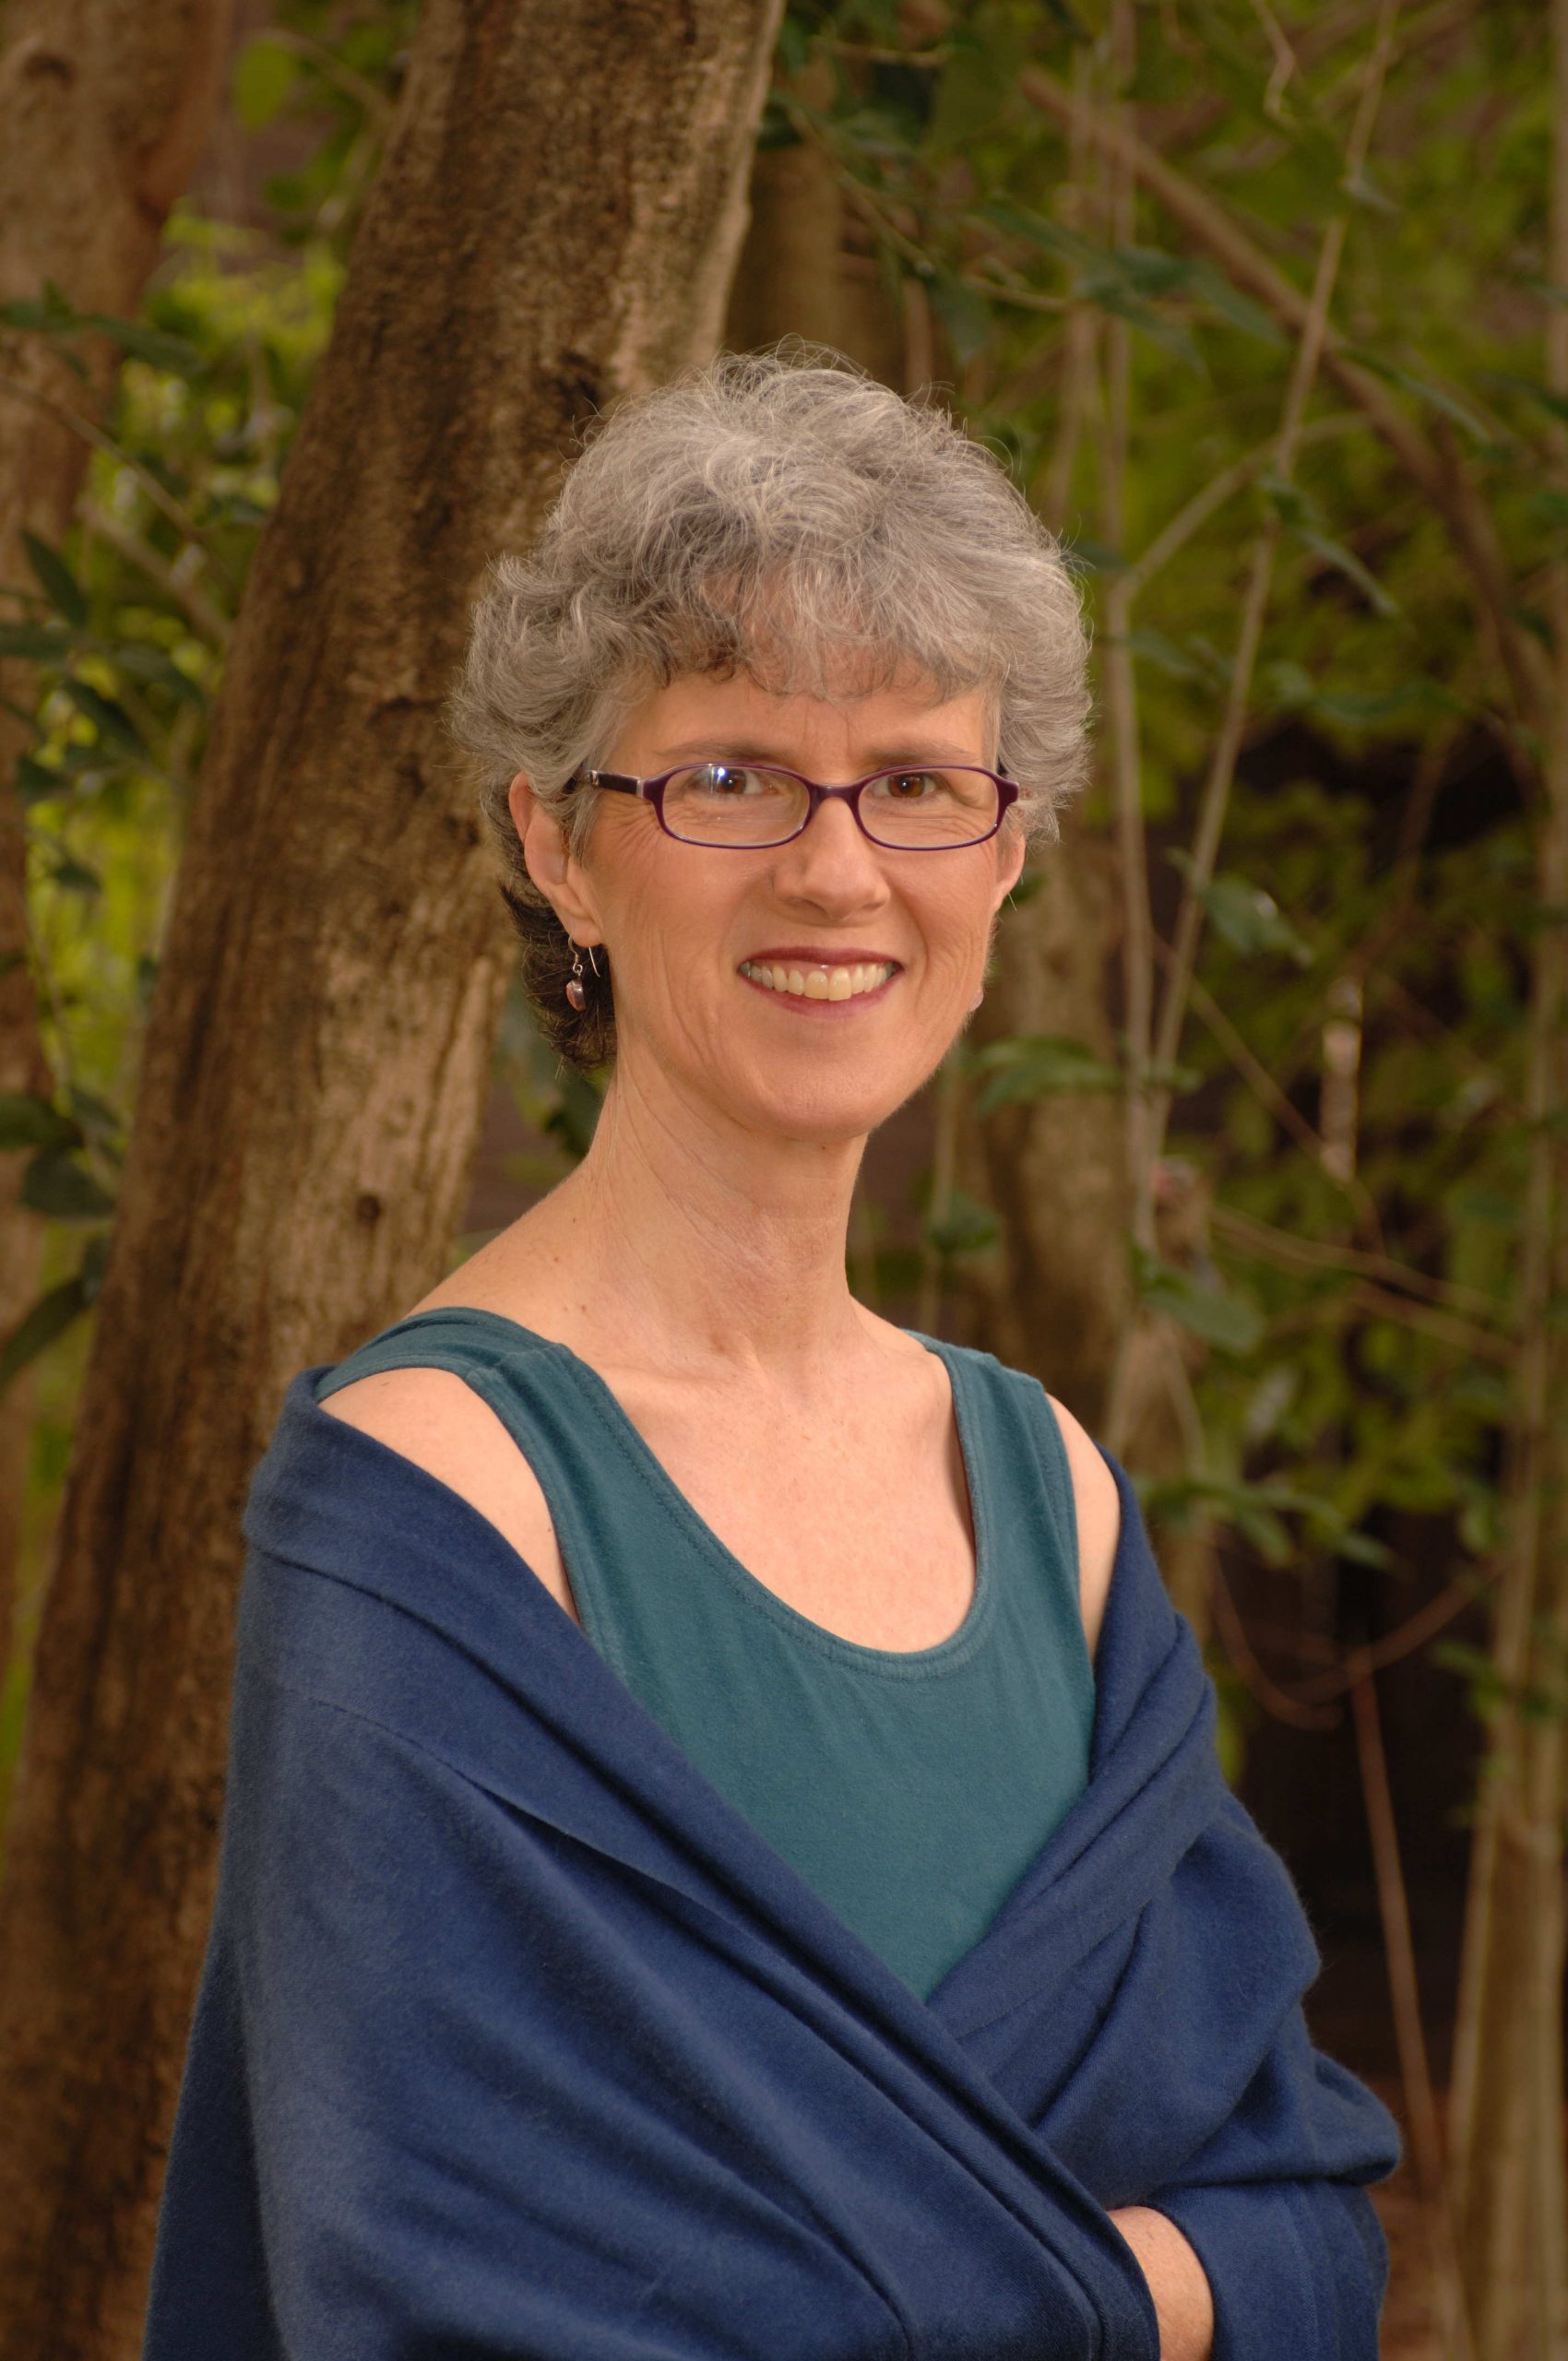 Image of Becca Pronchick, author of the Tap into Your Healing Power book.